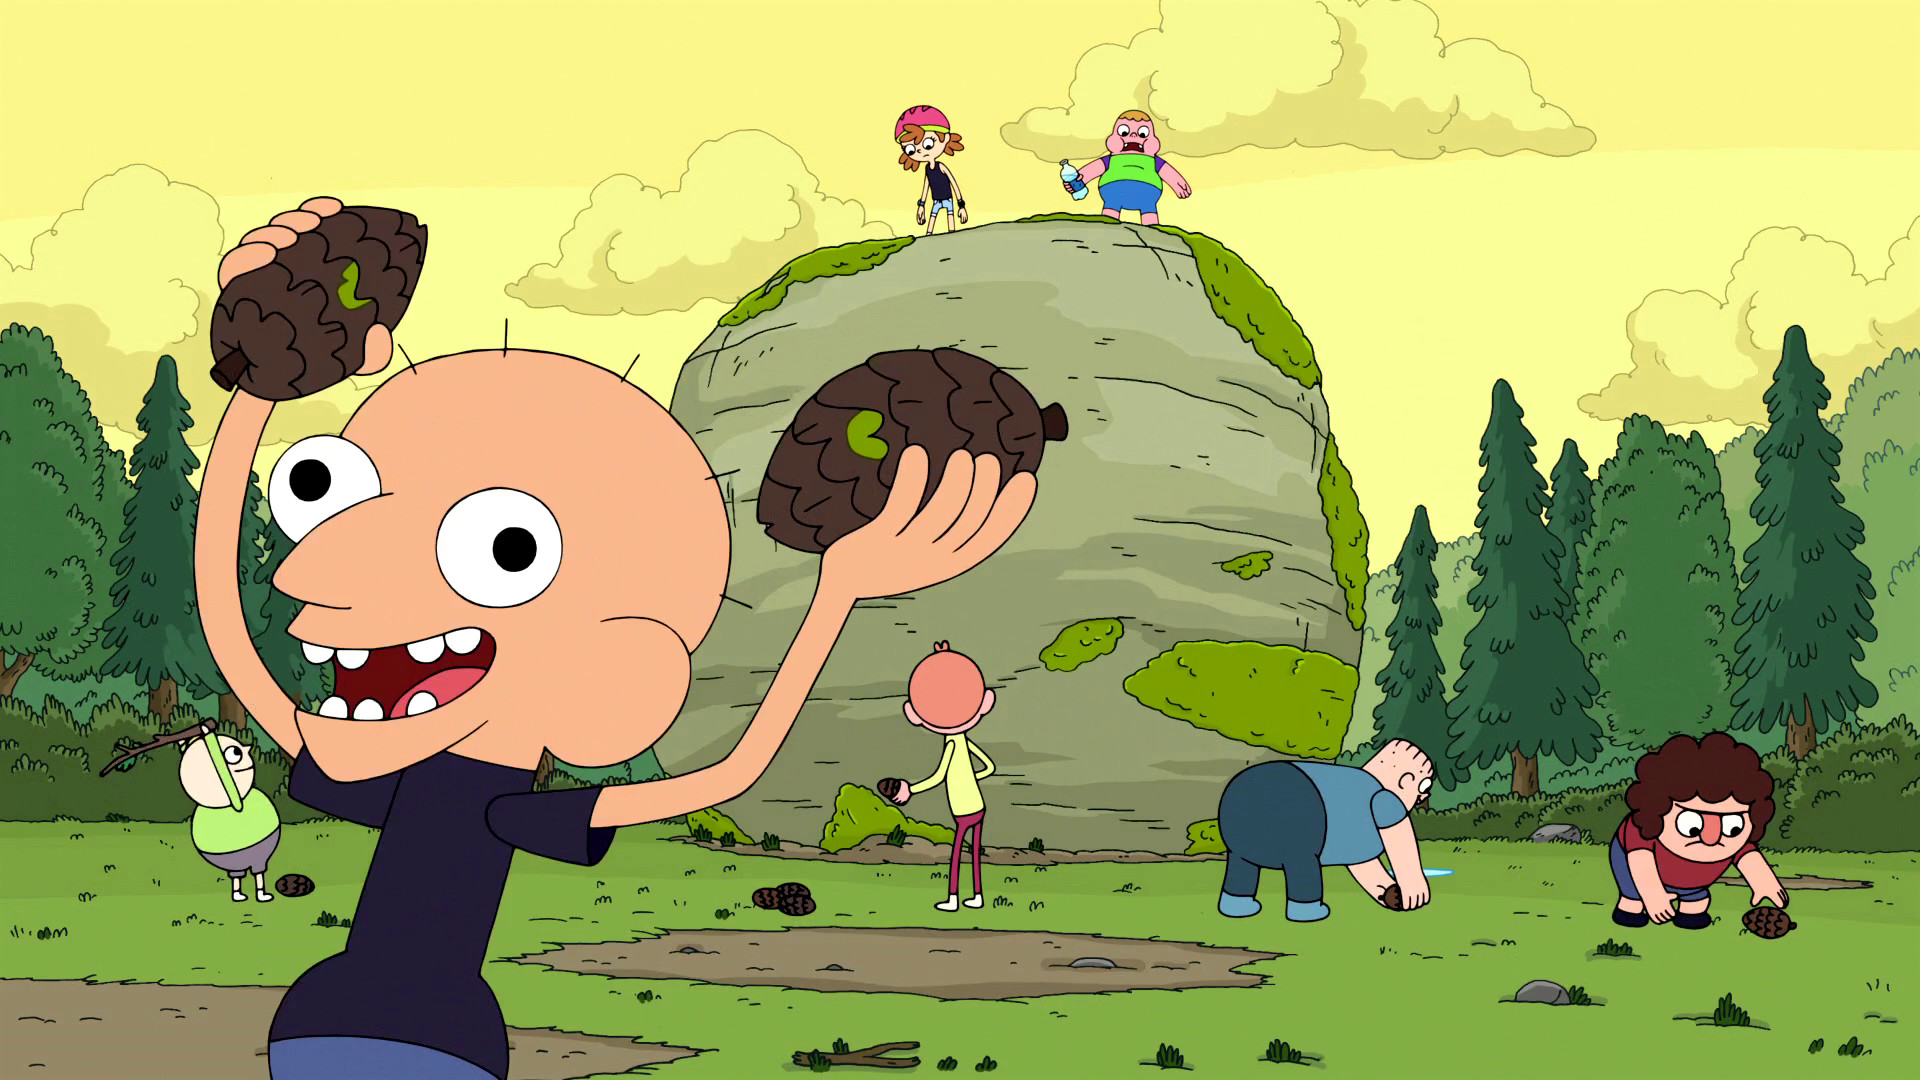 1920x1080 Image - Vlcsnap-2014-04-05-17h30m36s143.png | Clarence Wiki | FANDOM  powered by Wikia